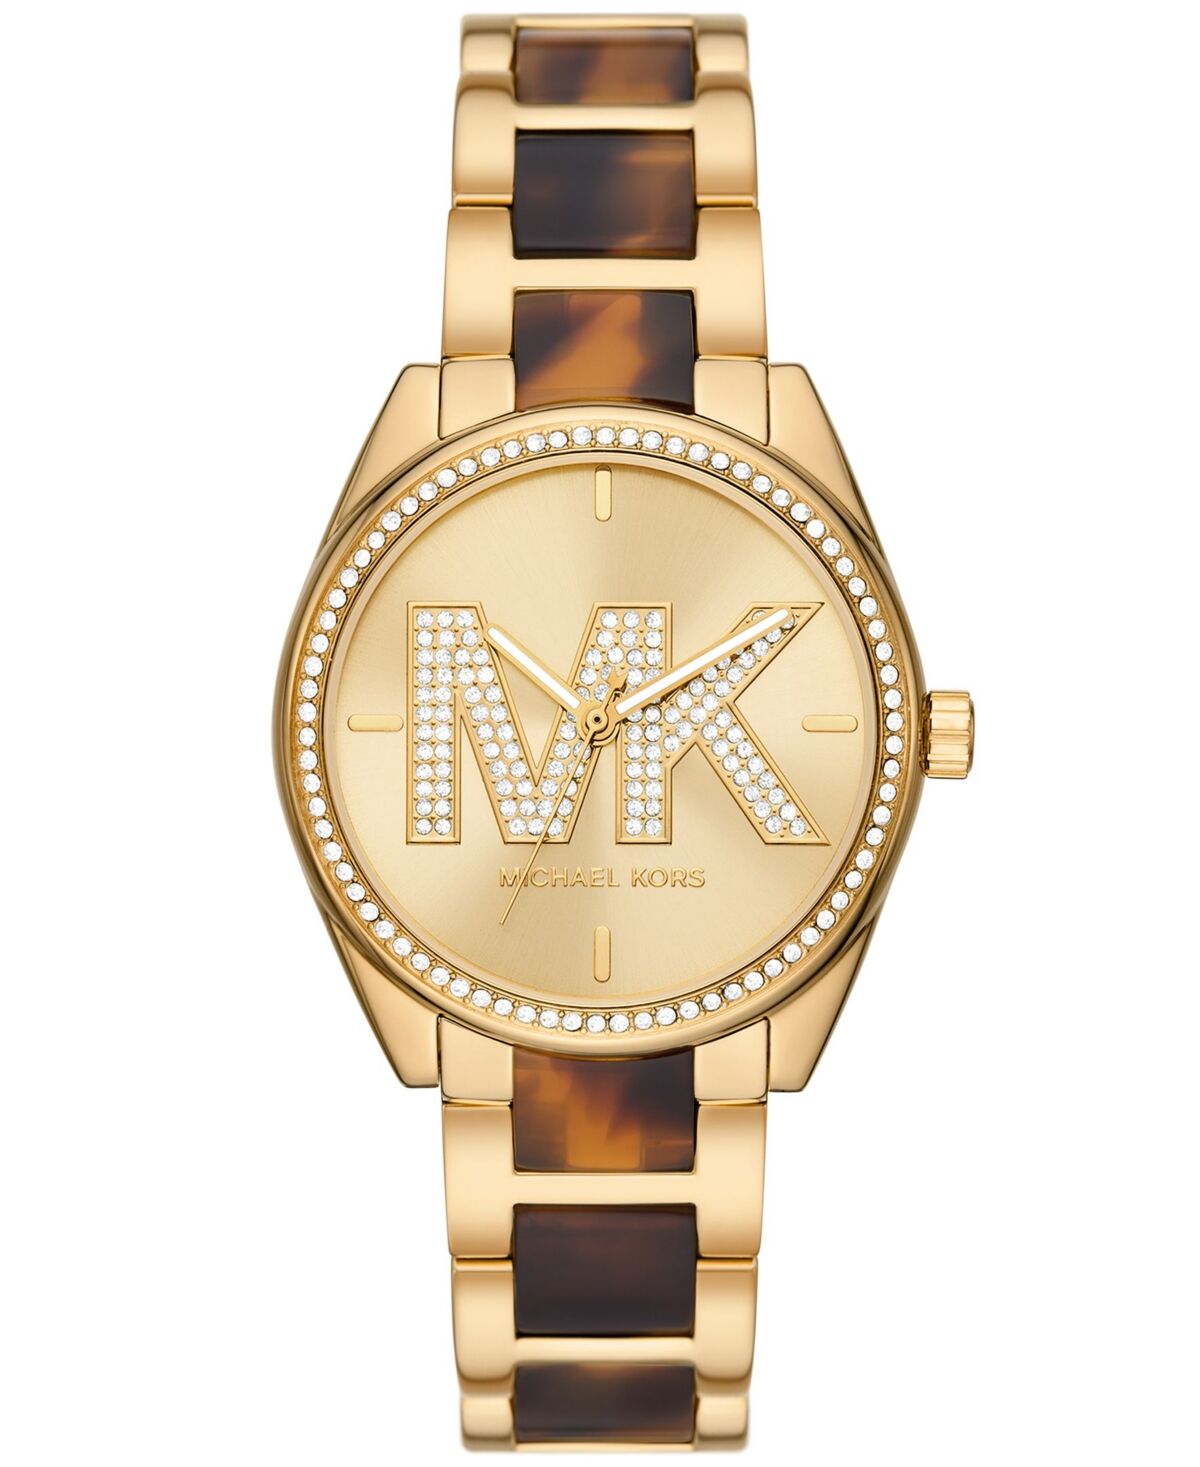 Michael Kors Women's Janelle Three-Hand Two-Tone Stainless Steel Watch 36mm - Two-Tone